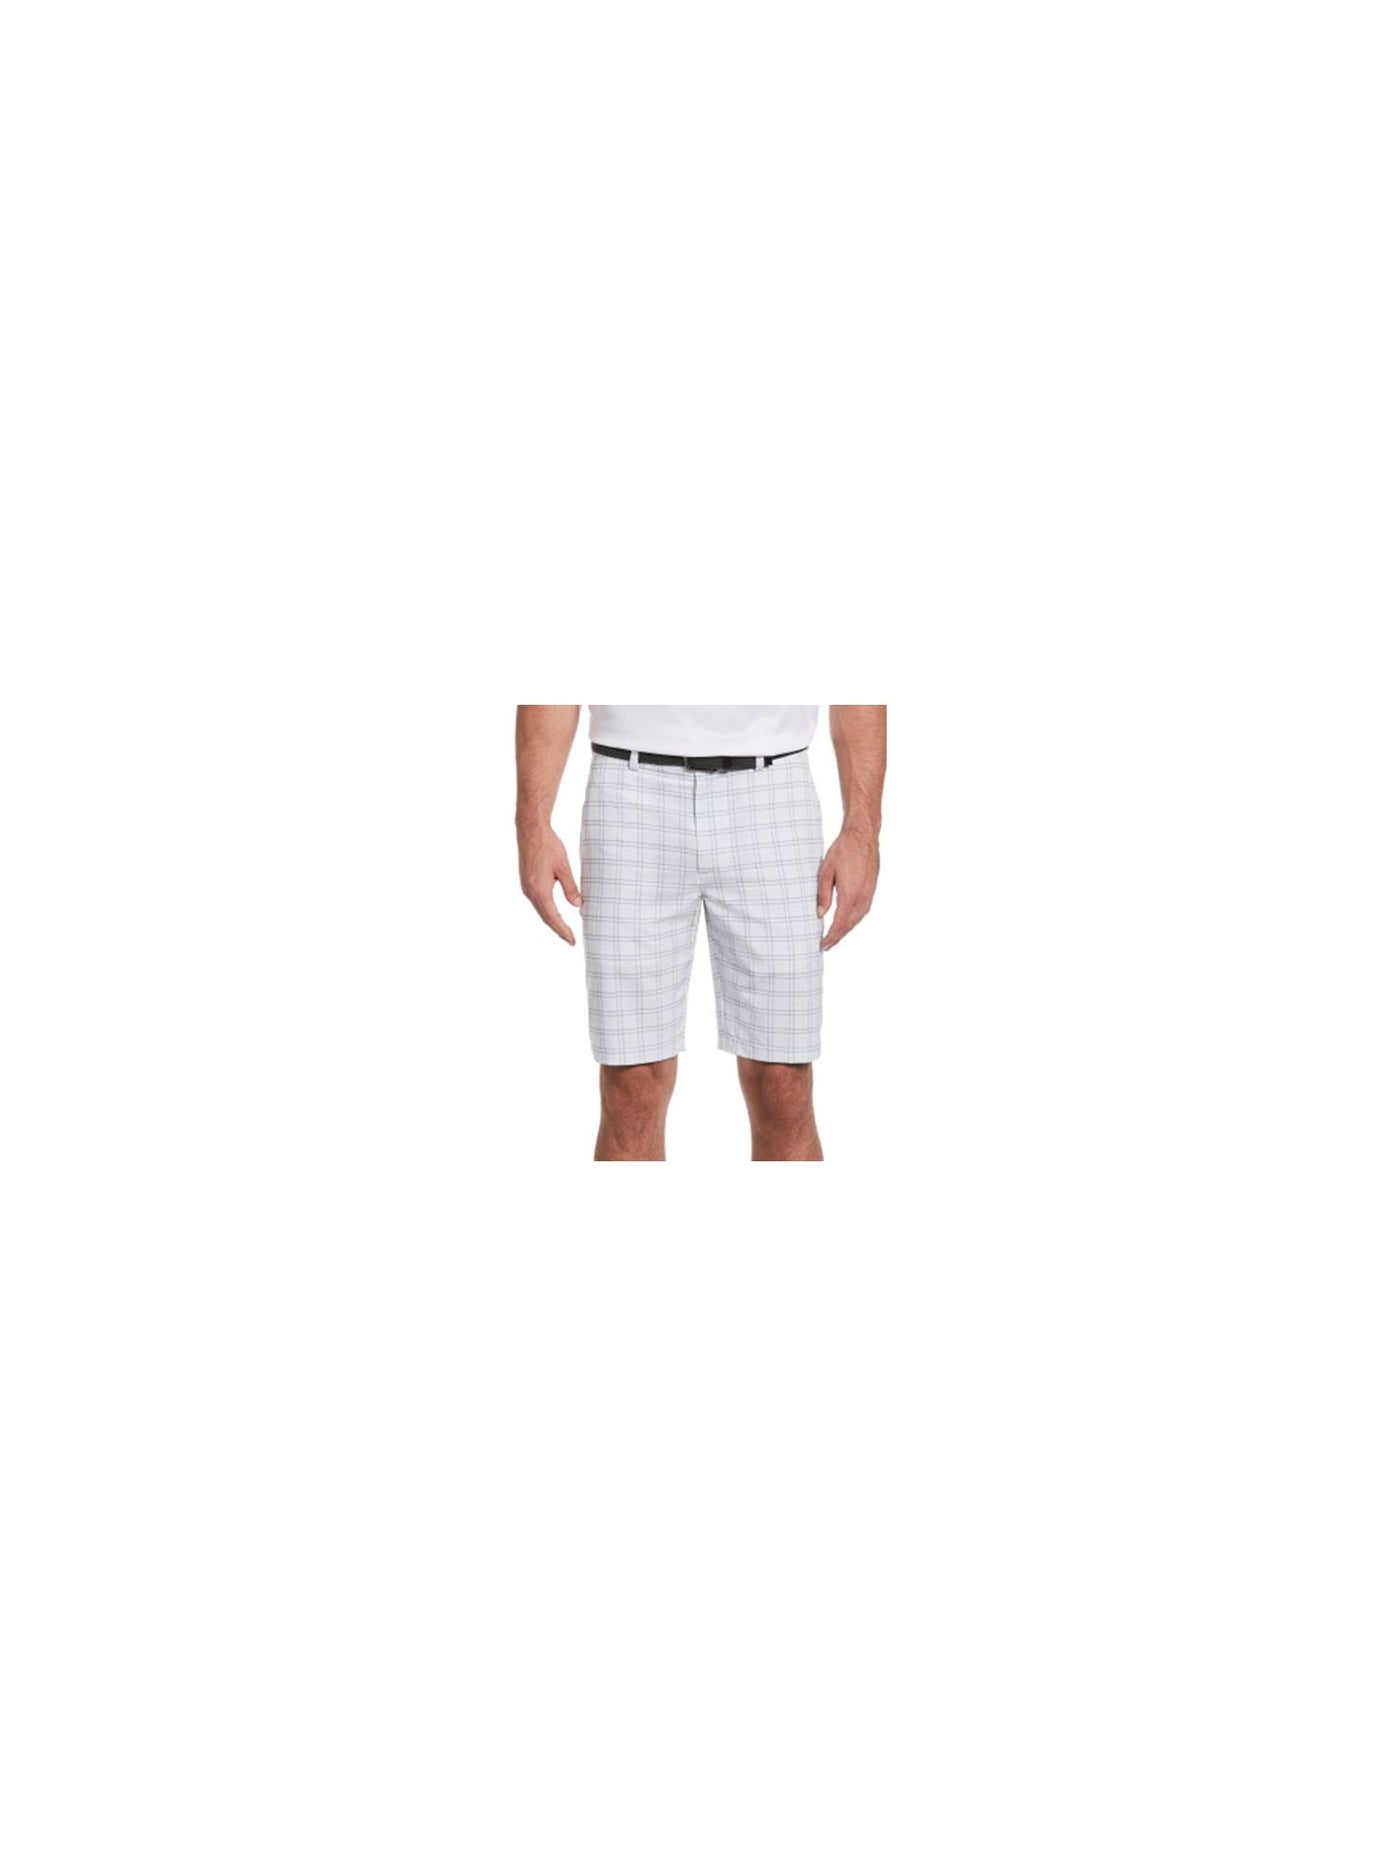 HYBRID APPAREL Mens White Flat Front, Printed Stretch Shorts 42